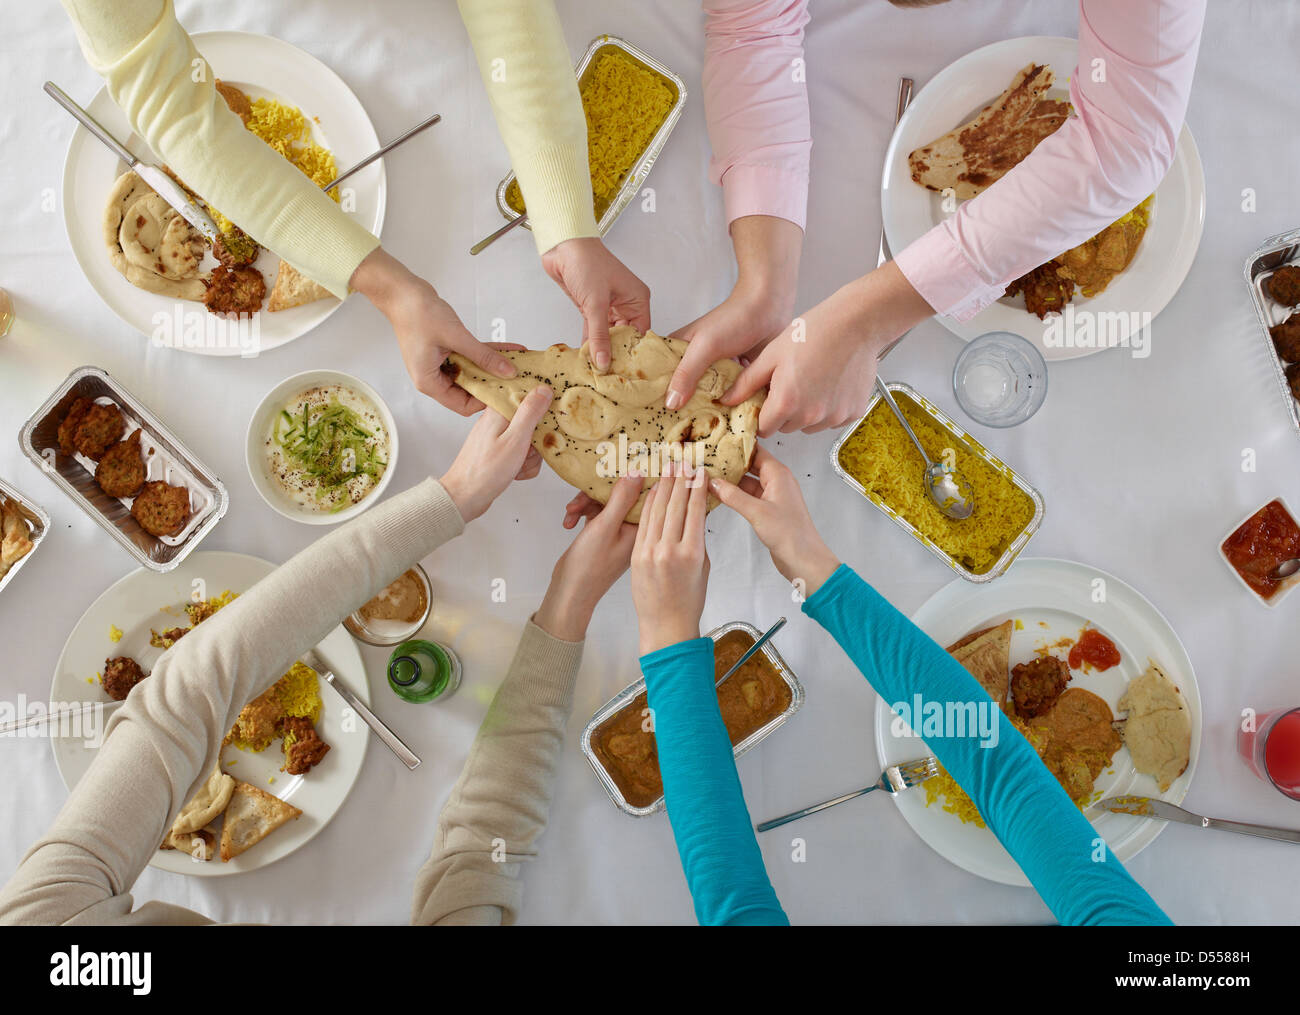 Overhead view of people sharing at table Stock Photo